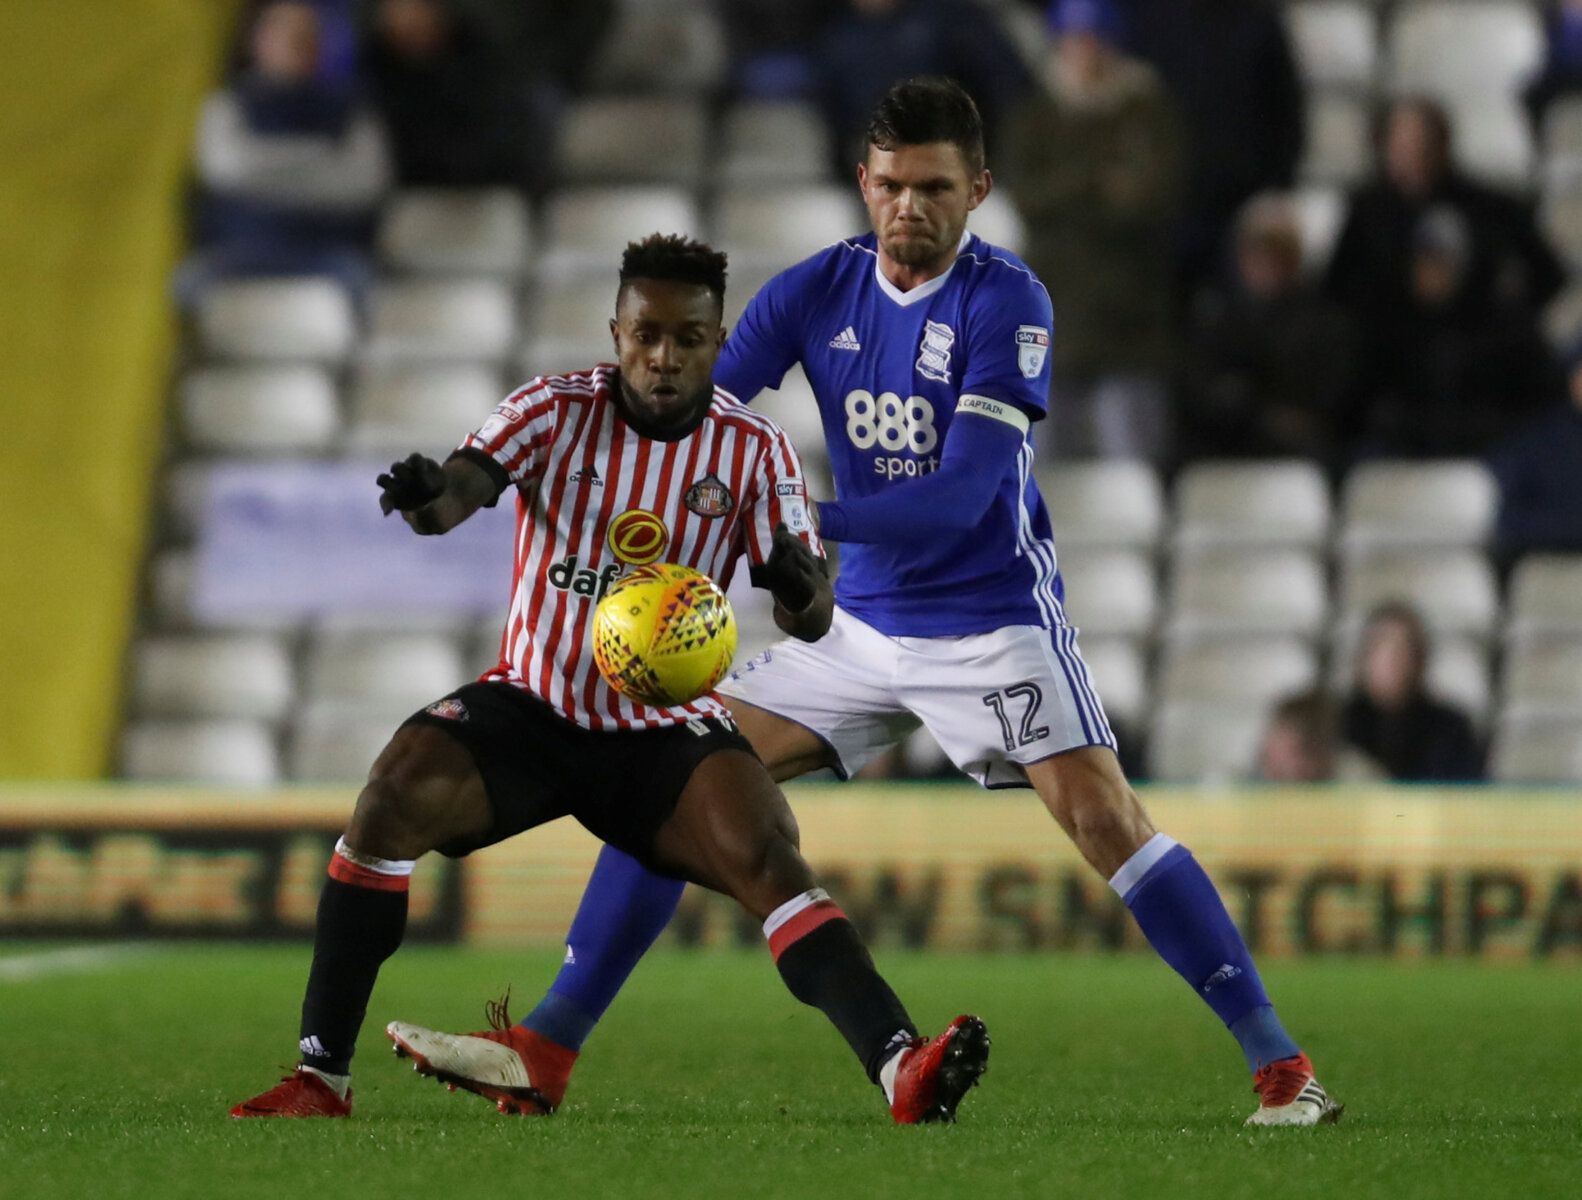 Soccer Football - Championship - Birmingham City vs Sunderland - St AndrewÕs, Birmingham, Britain - January 30, 2018  Birmingham's Harlee Dean in action with Sunderland's Kazenga Lualua  Action Images/Paul Childs  EDITORIAL USE ONLY. No use with unauthorized audio, video, data, fixture lists, club/league logos or 